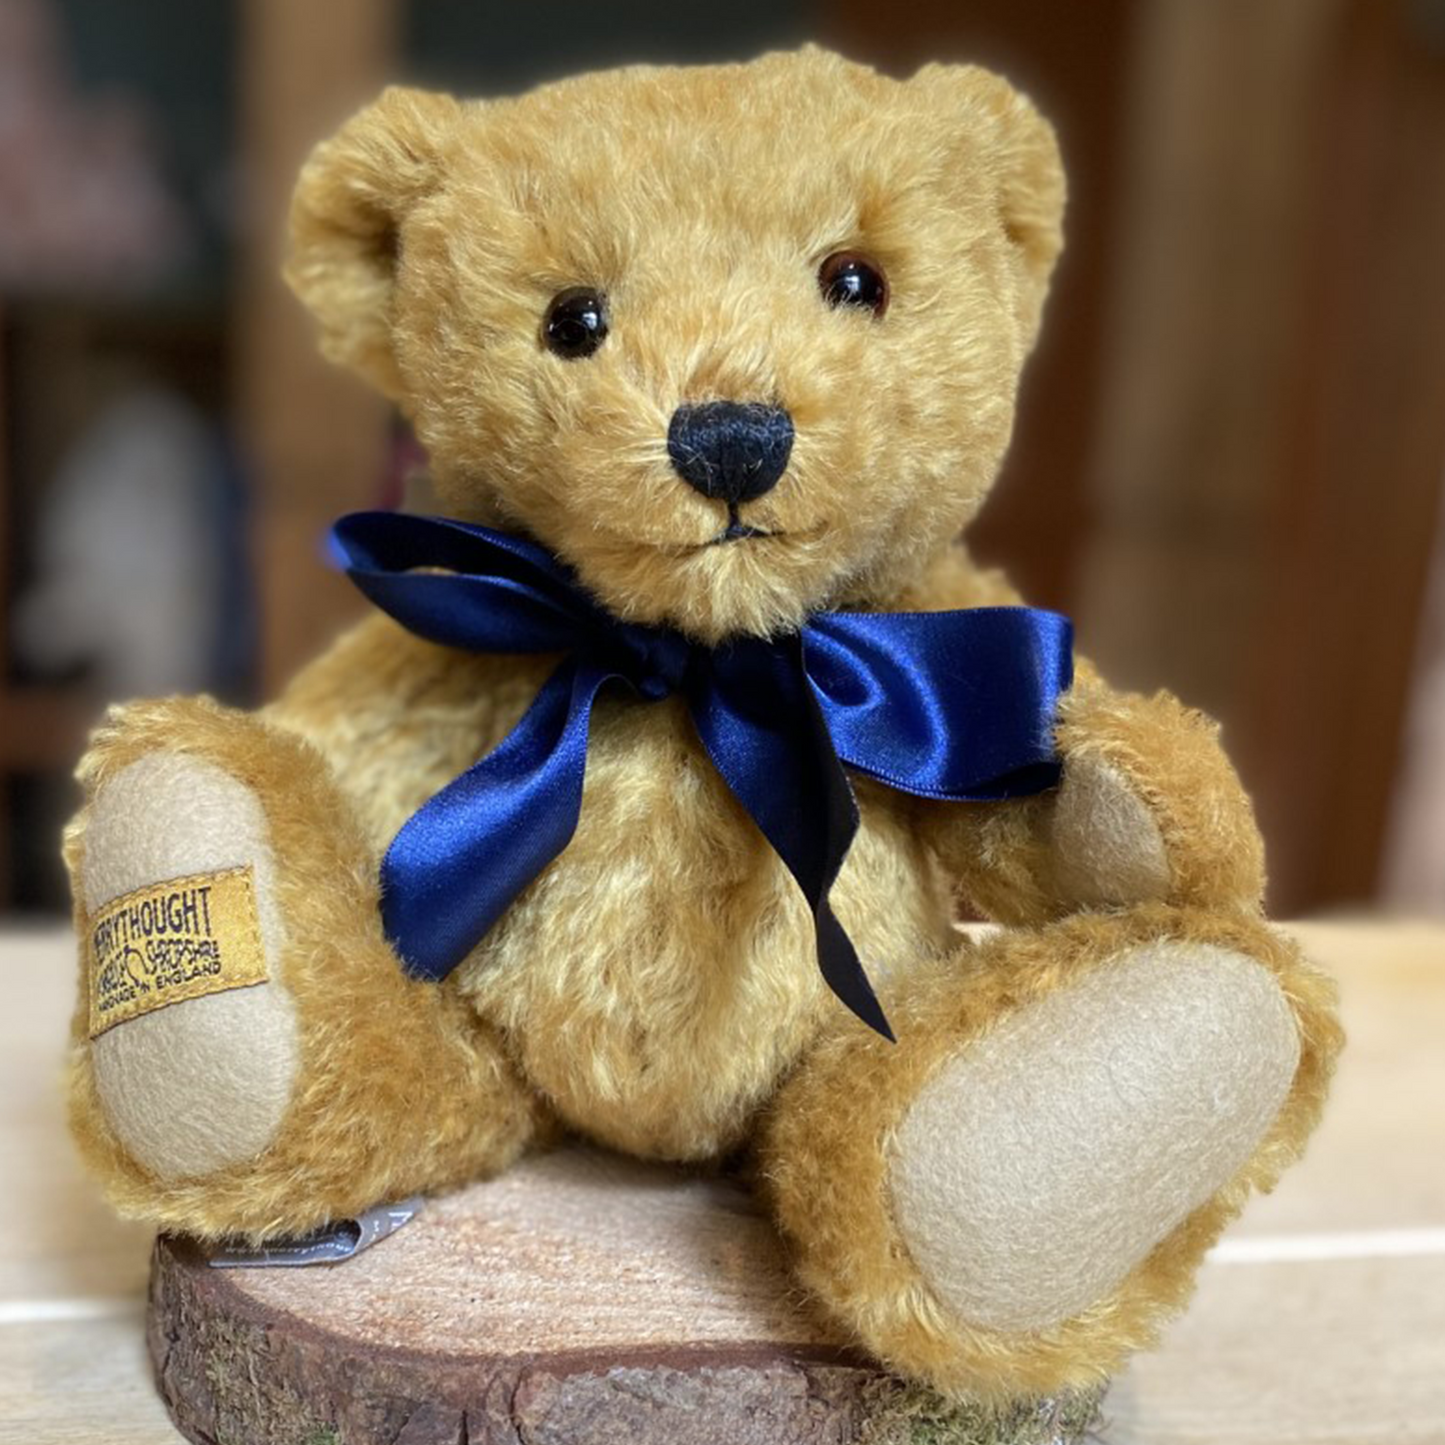 Crafted from wonderfully soft, rich golden mohair, Oxford's rotund shape and characterful dark brown eyes are guaranteed to warm hearts across the generations. His colours coordinate perfectly with dark sand wool felt paws and a splendid navy blue satin bow to finish.